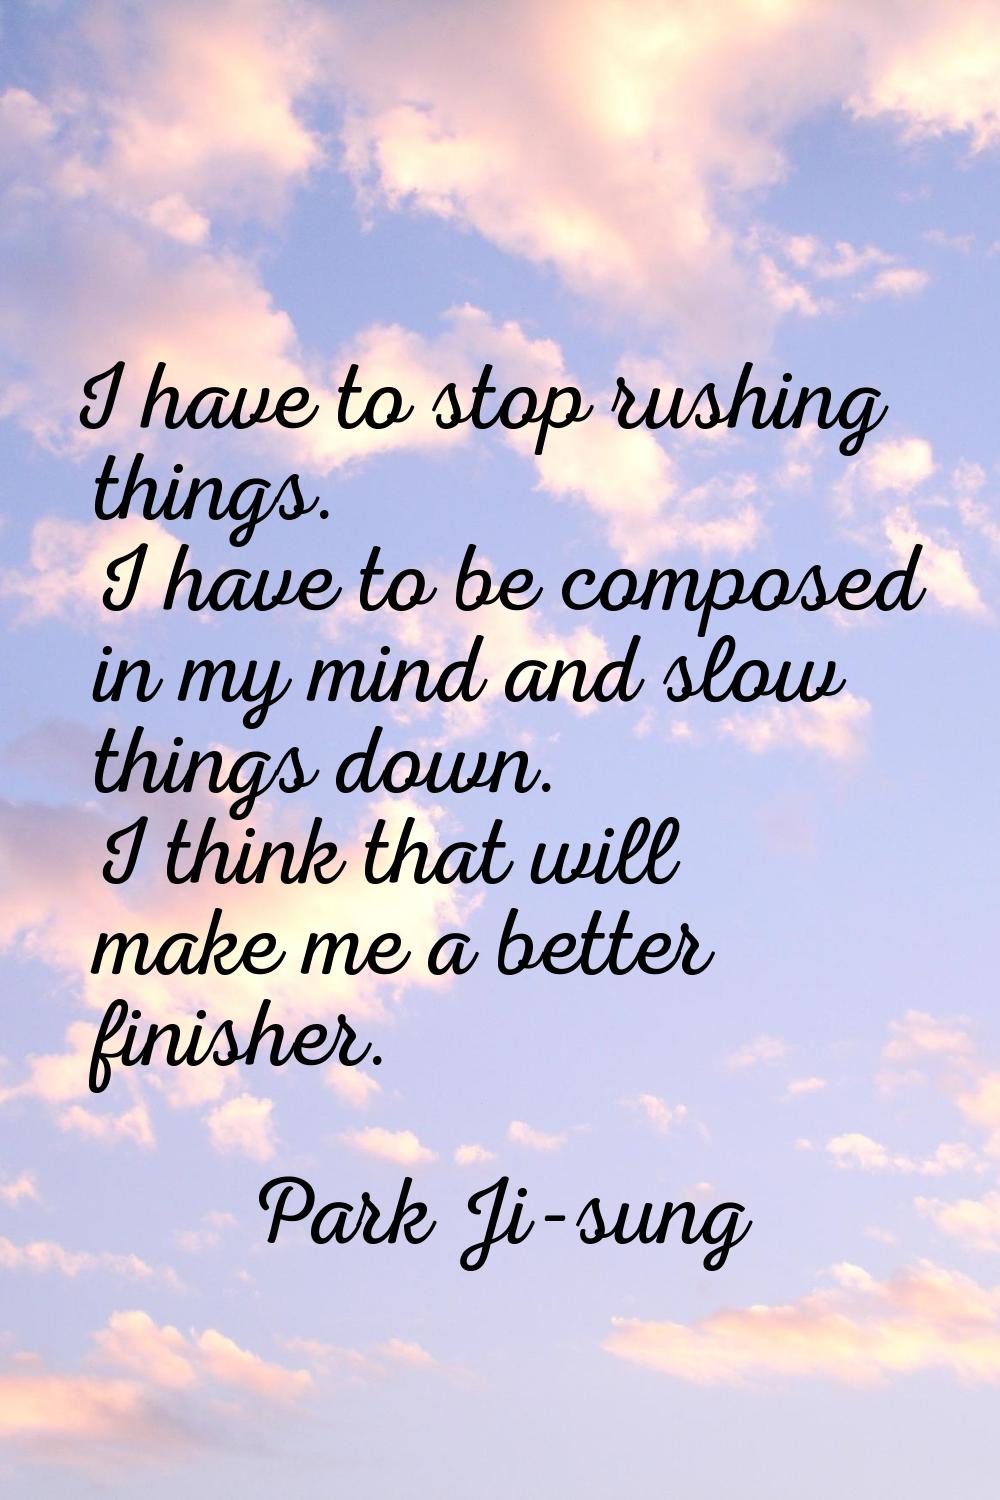 I have to stop rushing things. I have to be composed in my mind and slow things down. I think that 